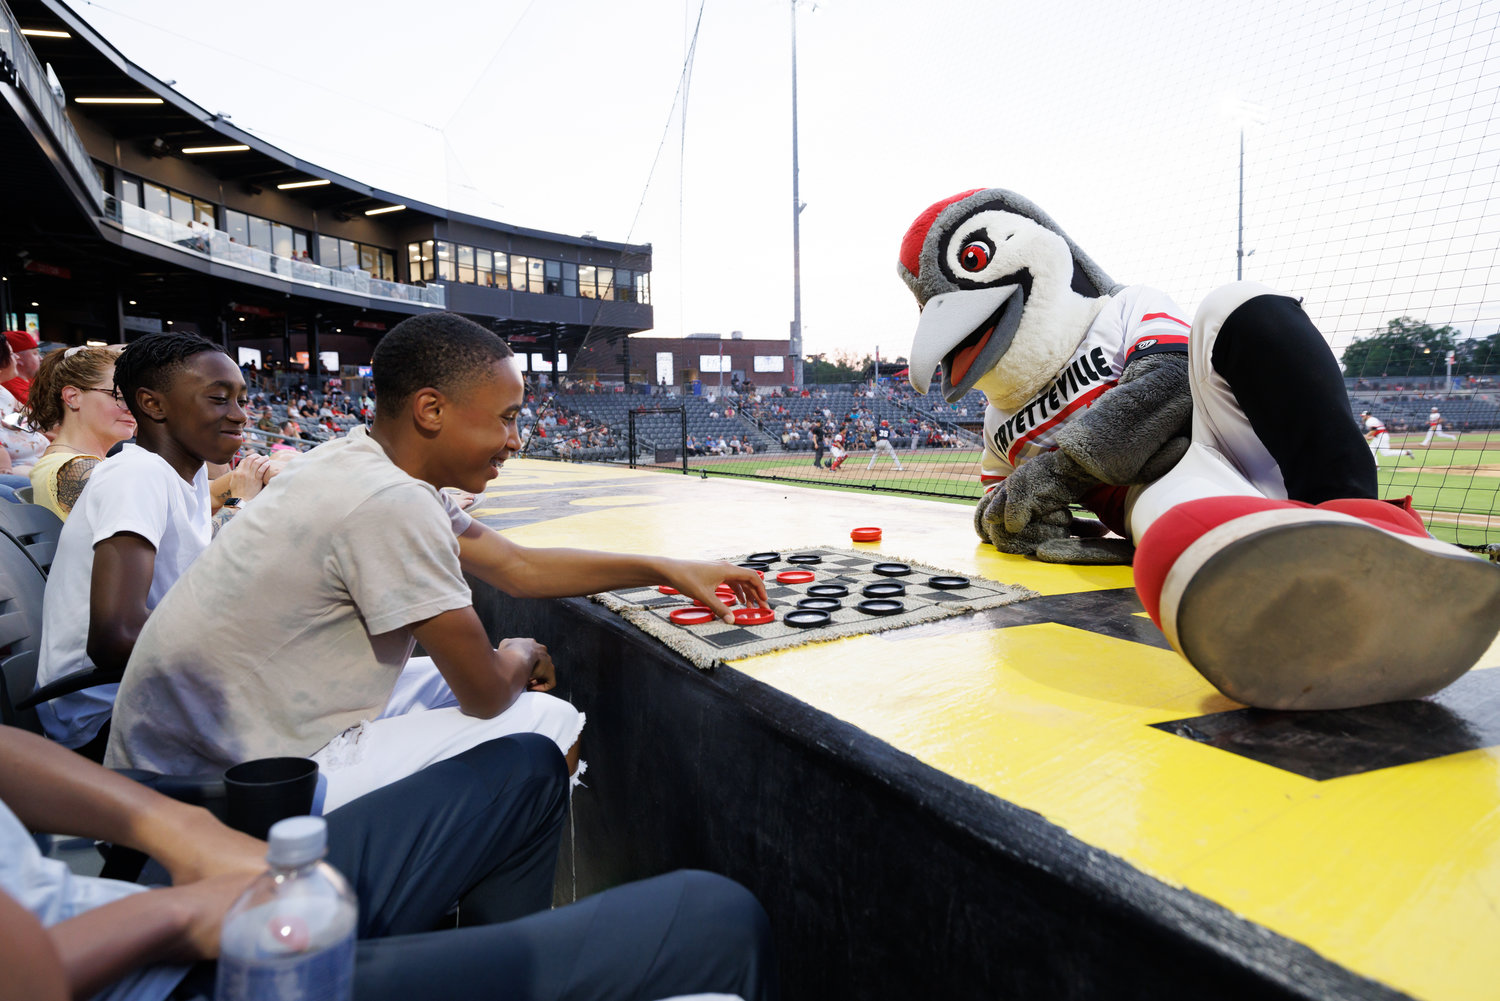 CHECK IT OUT: For a seventh inning stretch at Segra Stadium, how about a game of checkers? Woodpeckers mascot Bunker challenges Christopher Wooten during a game break on June 1 as Jaiden Dingle looks on.